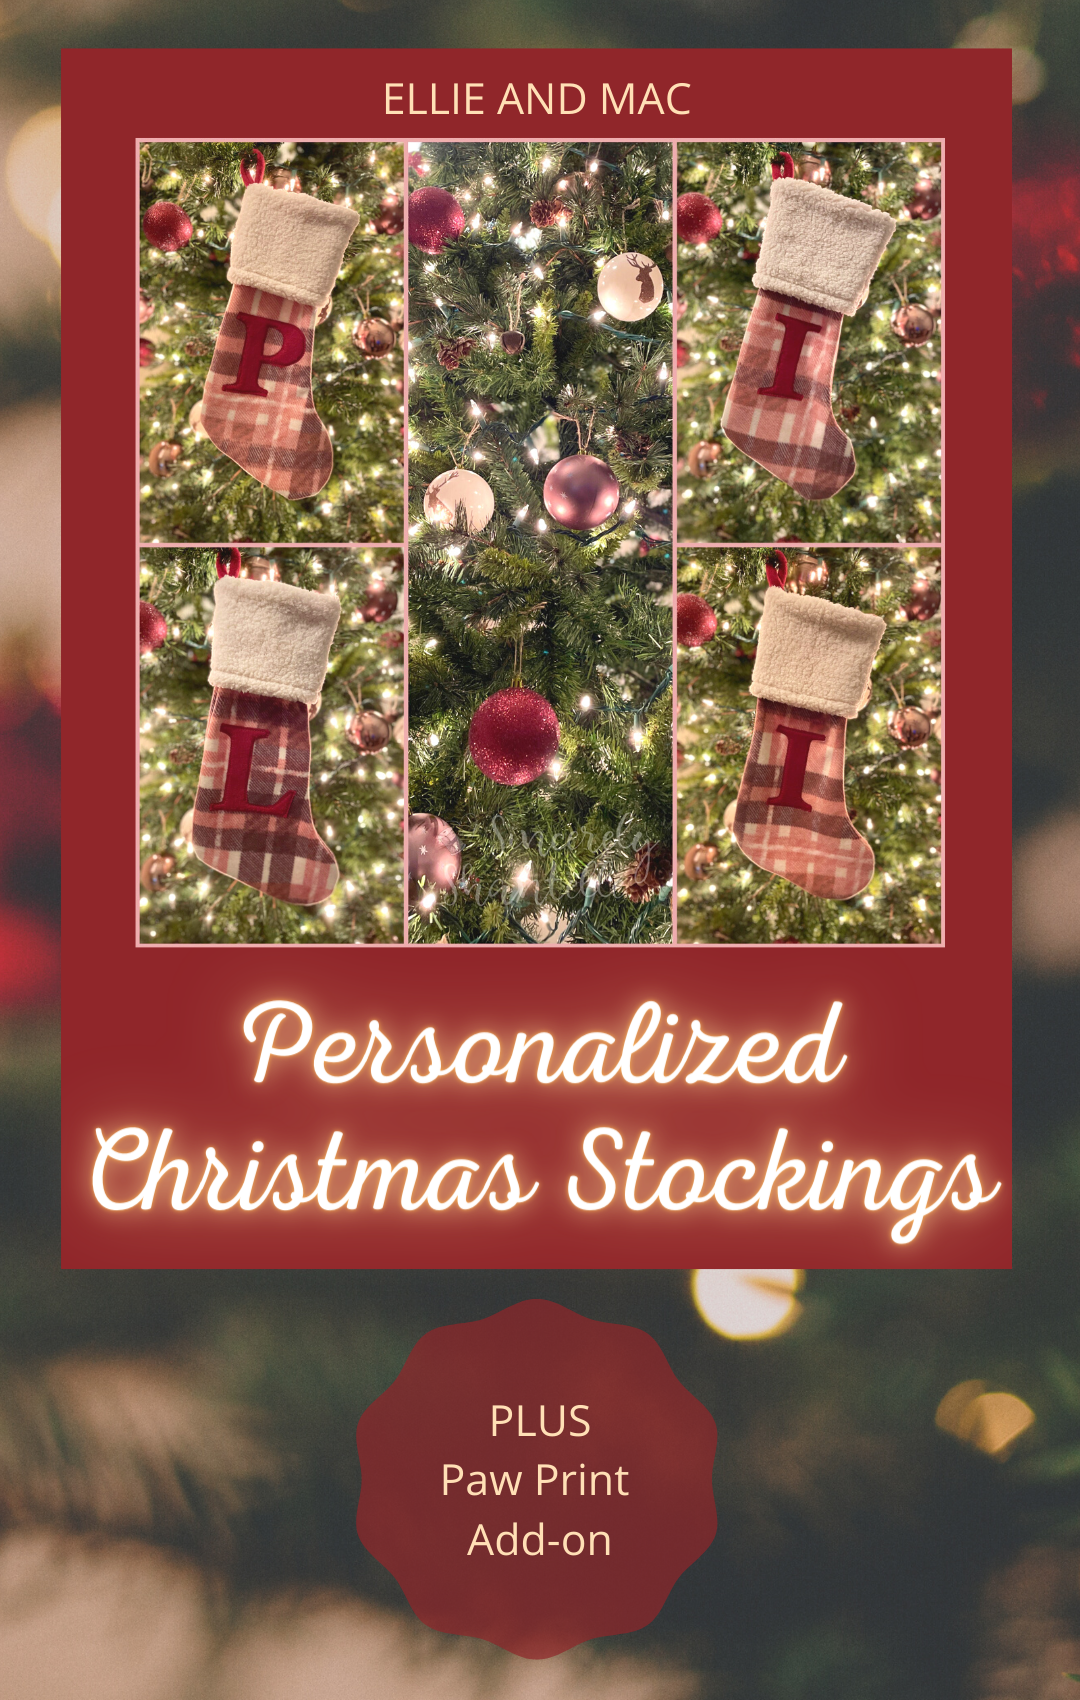 Personalized Christmas Stockings PLUS Paw Print Add-on!